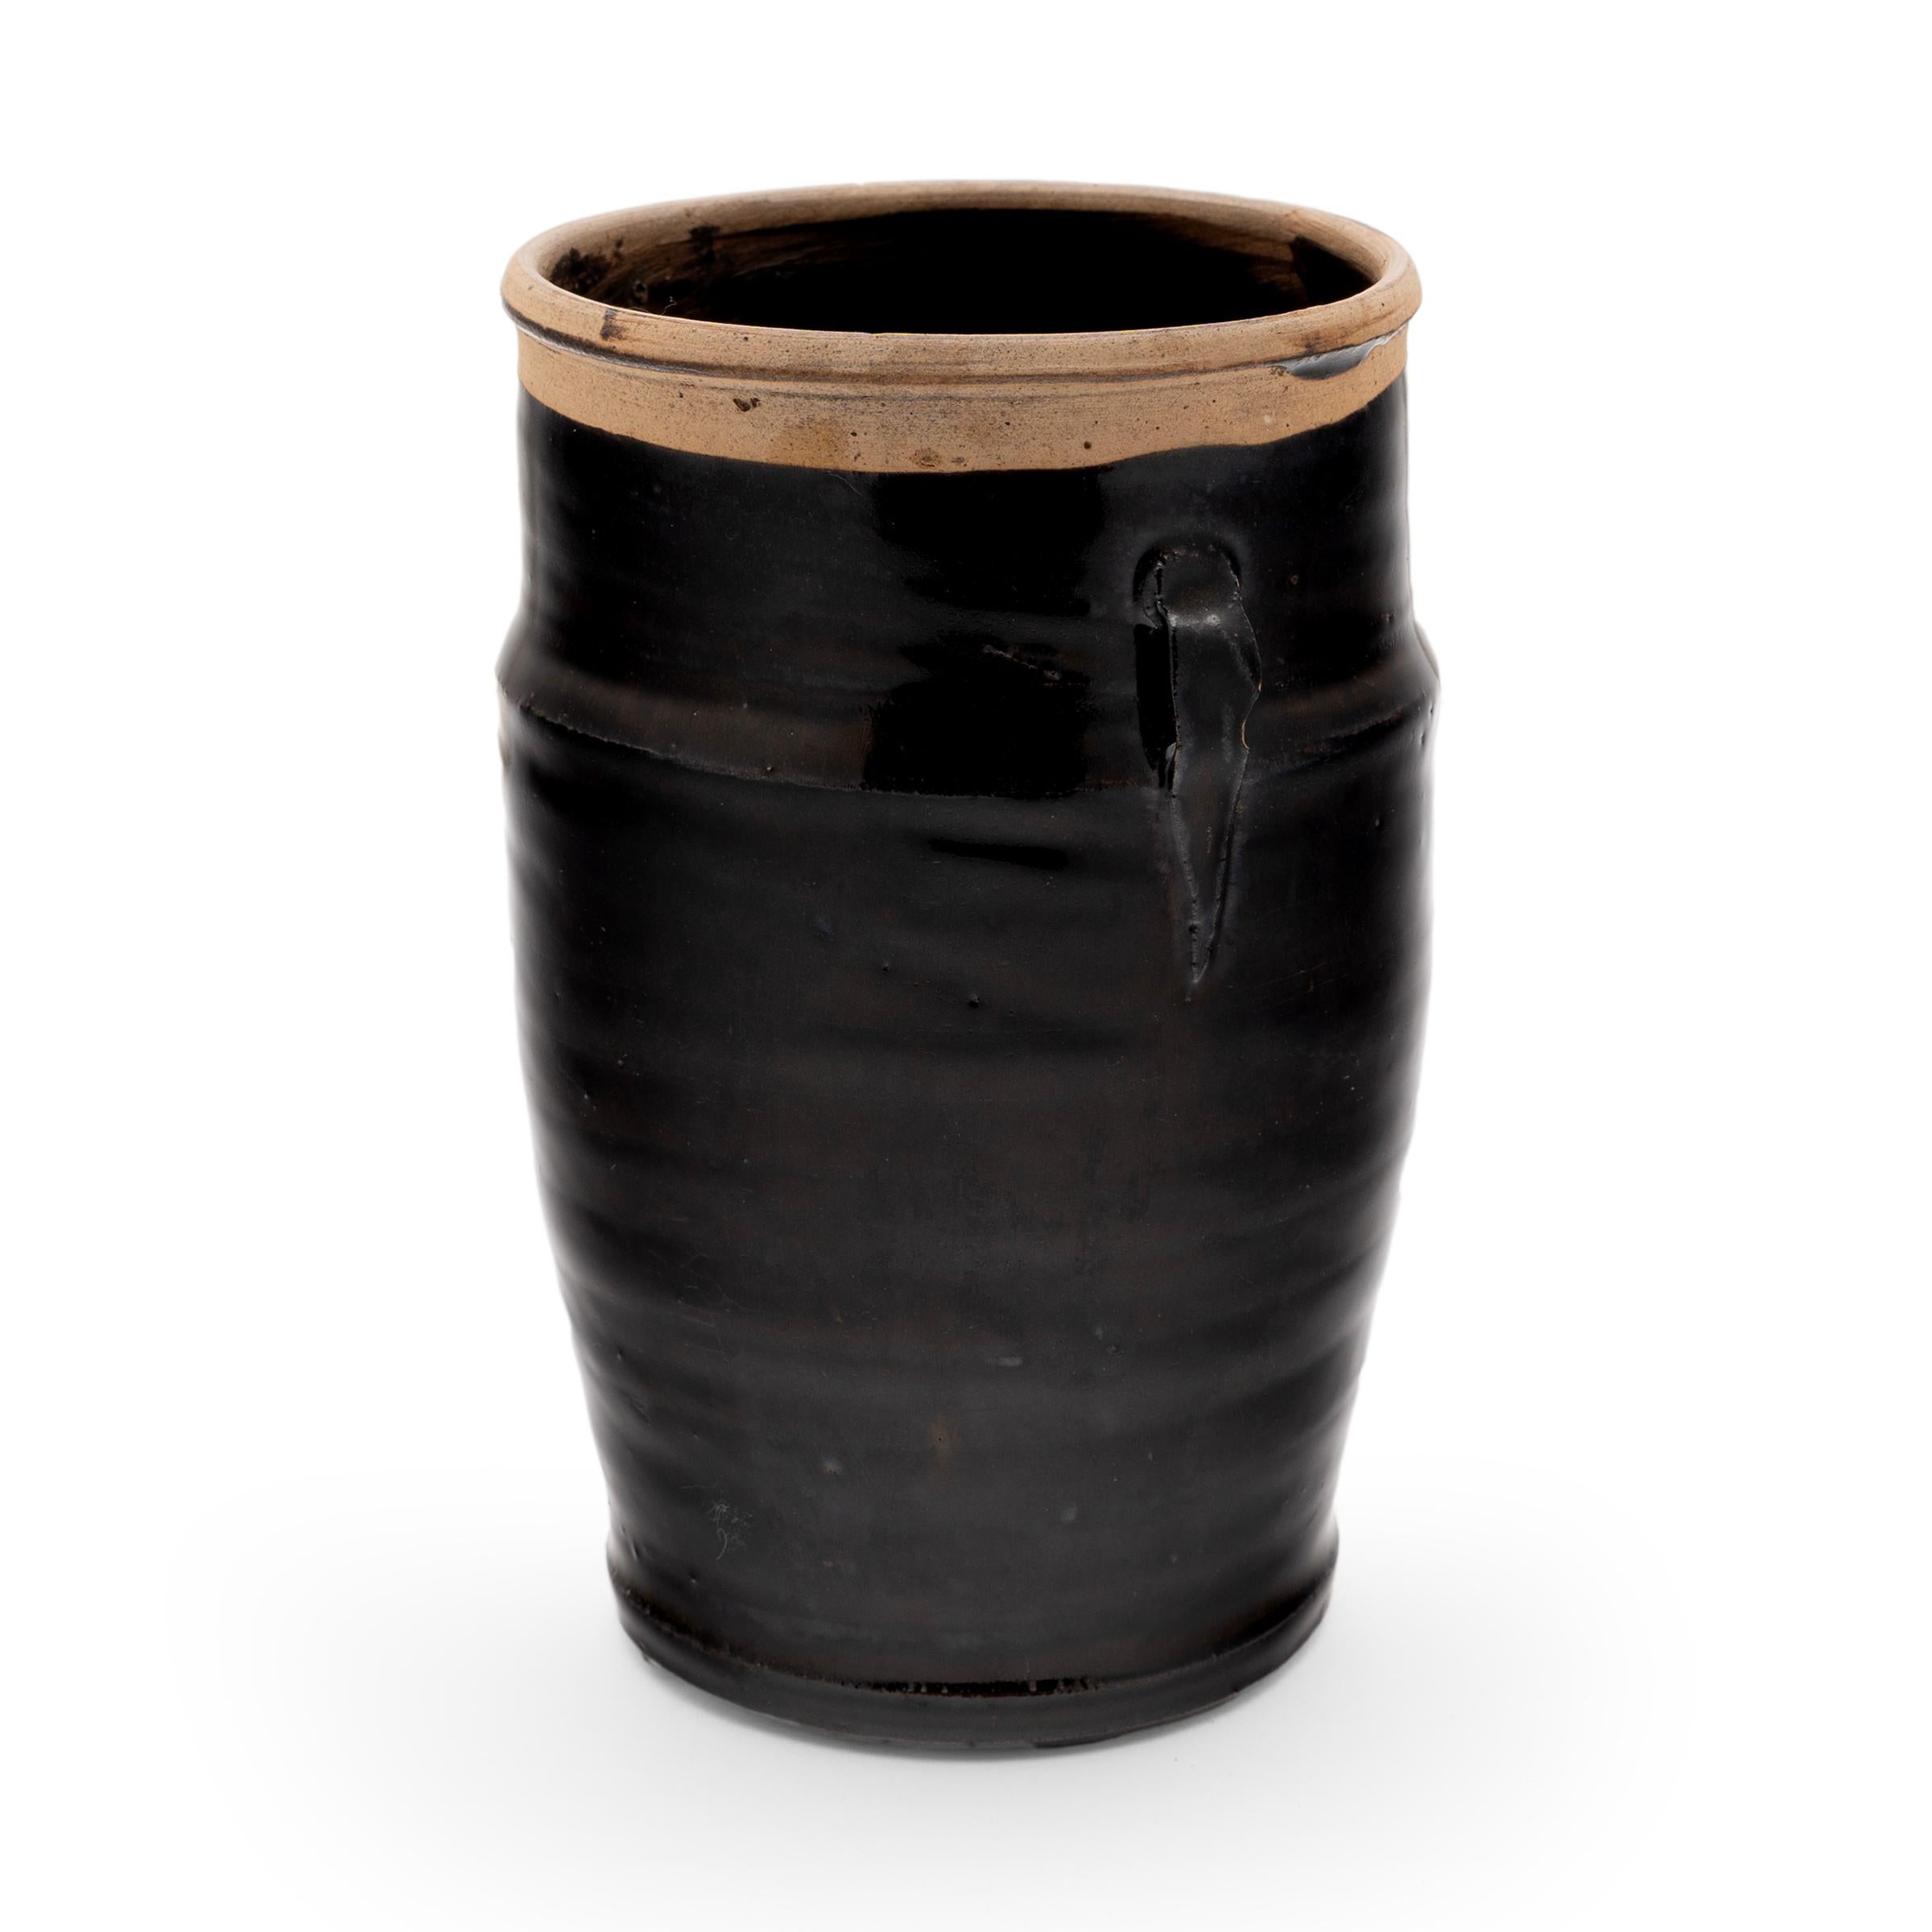 An opaque black glaze coats the body of this small early 20th-century kitchen jar. As evidenced by the glazed interior, the jar was once used daily in a Qing-dynasty kitchen for fermenting or storing foods and condiments. The wide-mouth jar has a